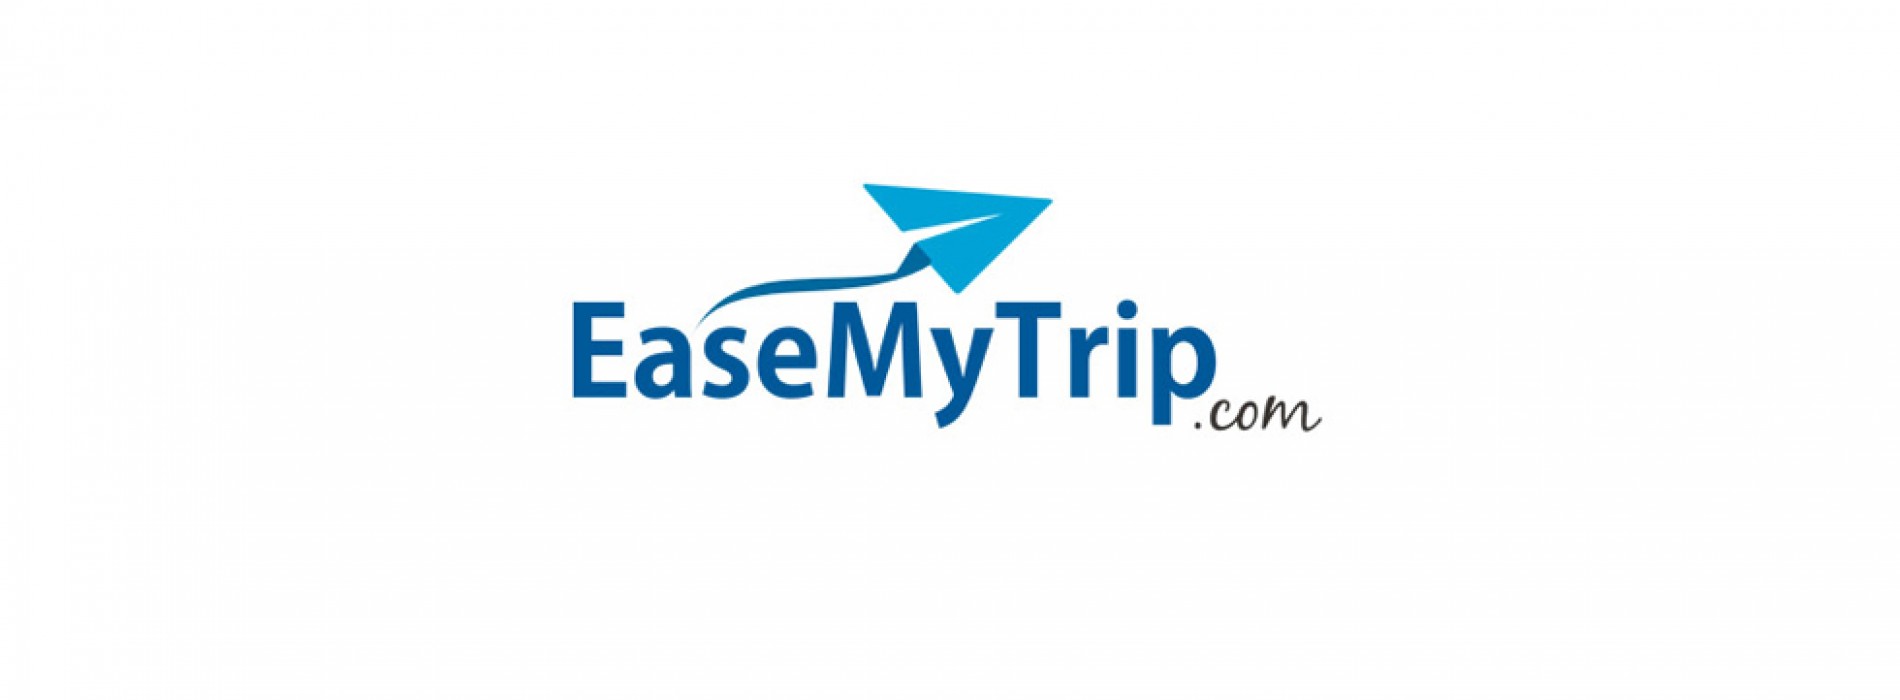 EaseMyTrip.com joins hand with NUU Mobile as an exclusive travel app